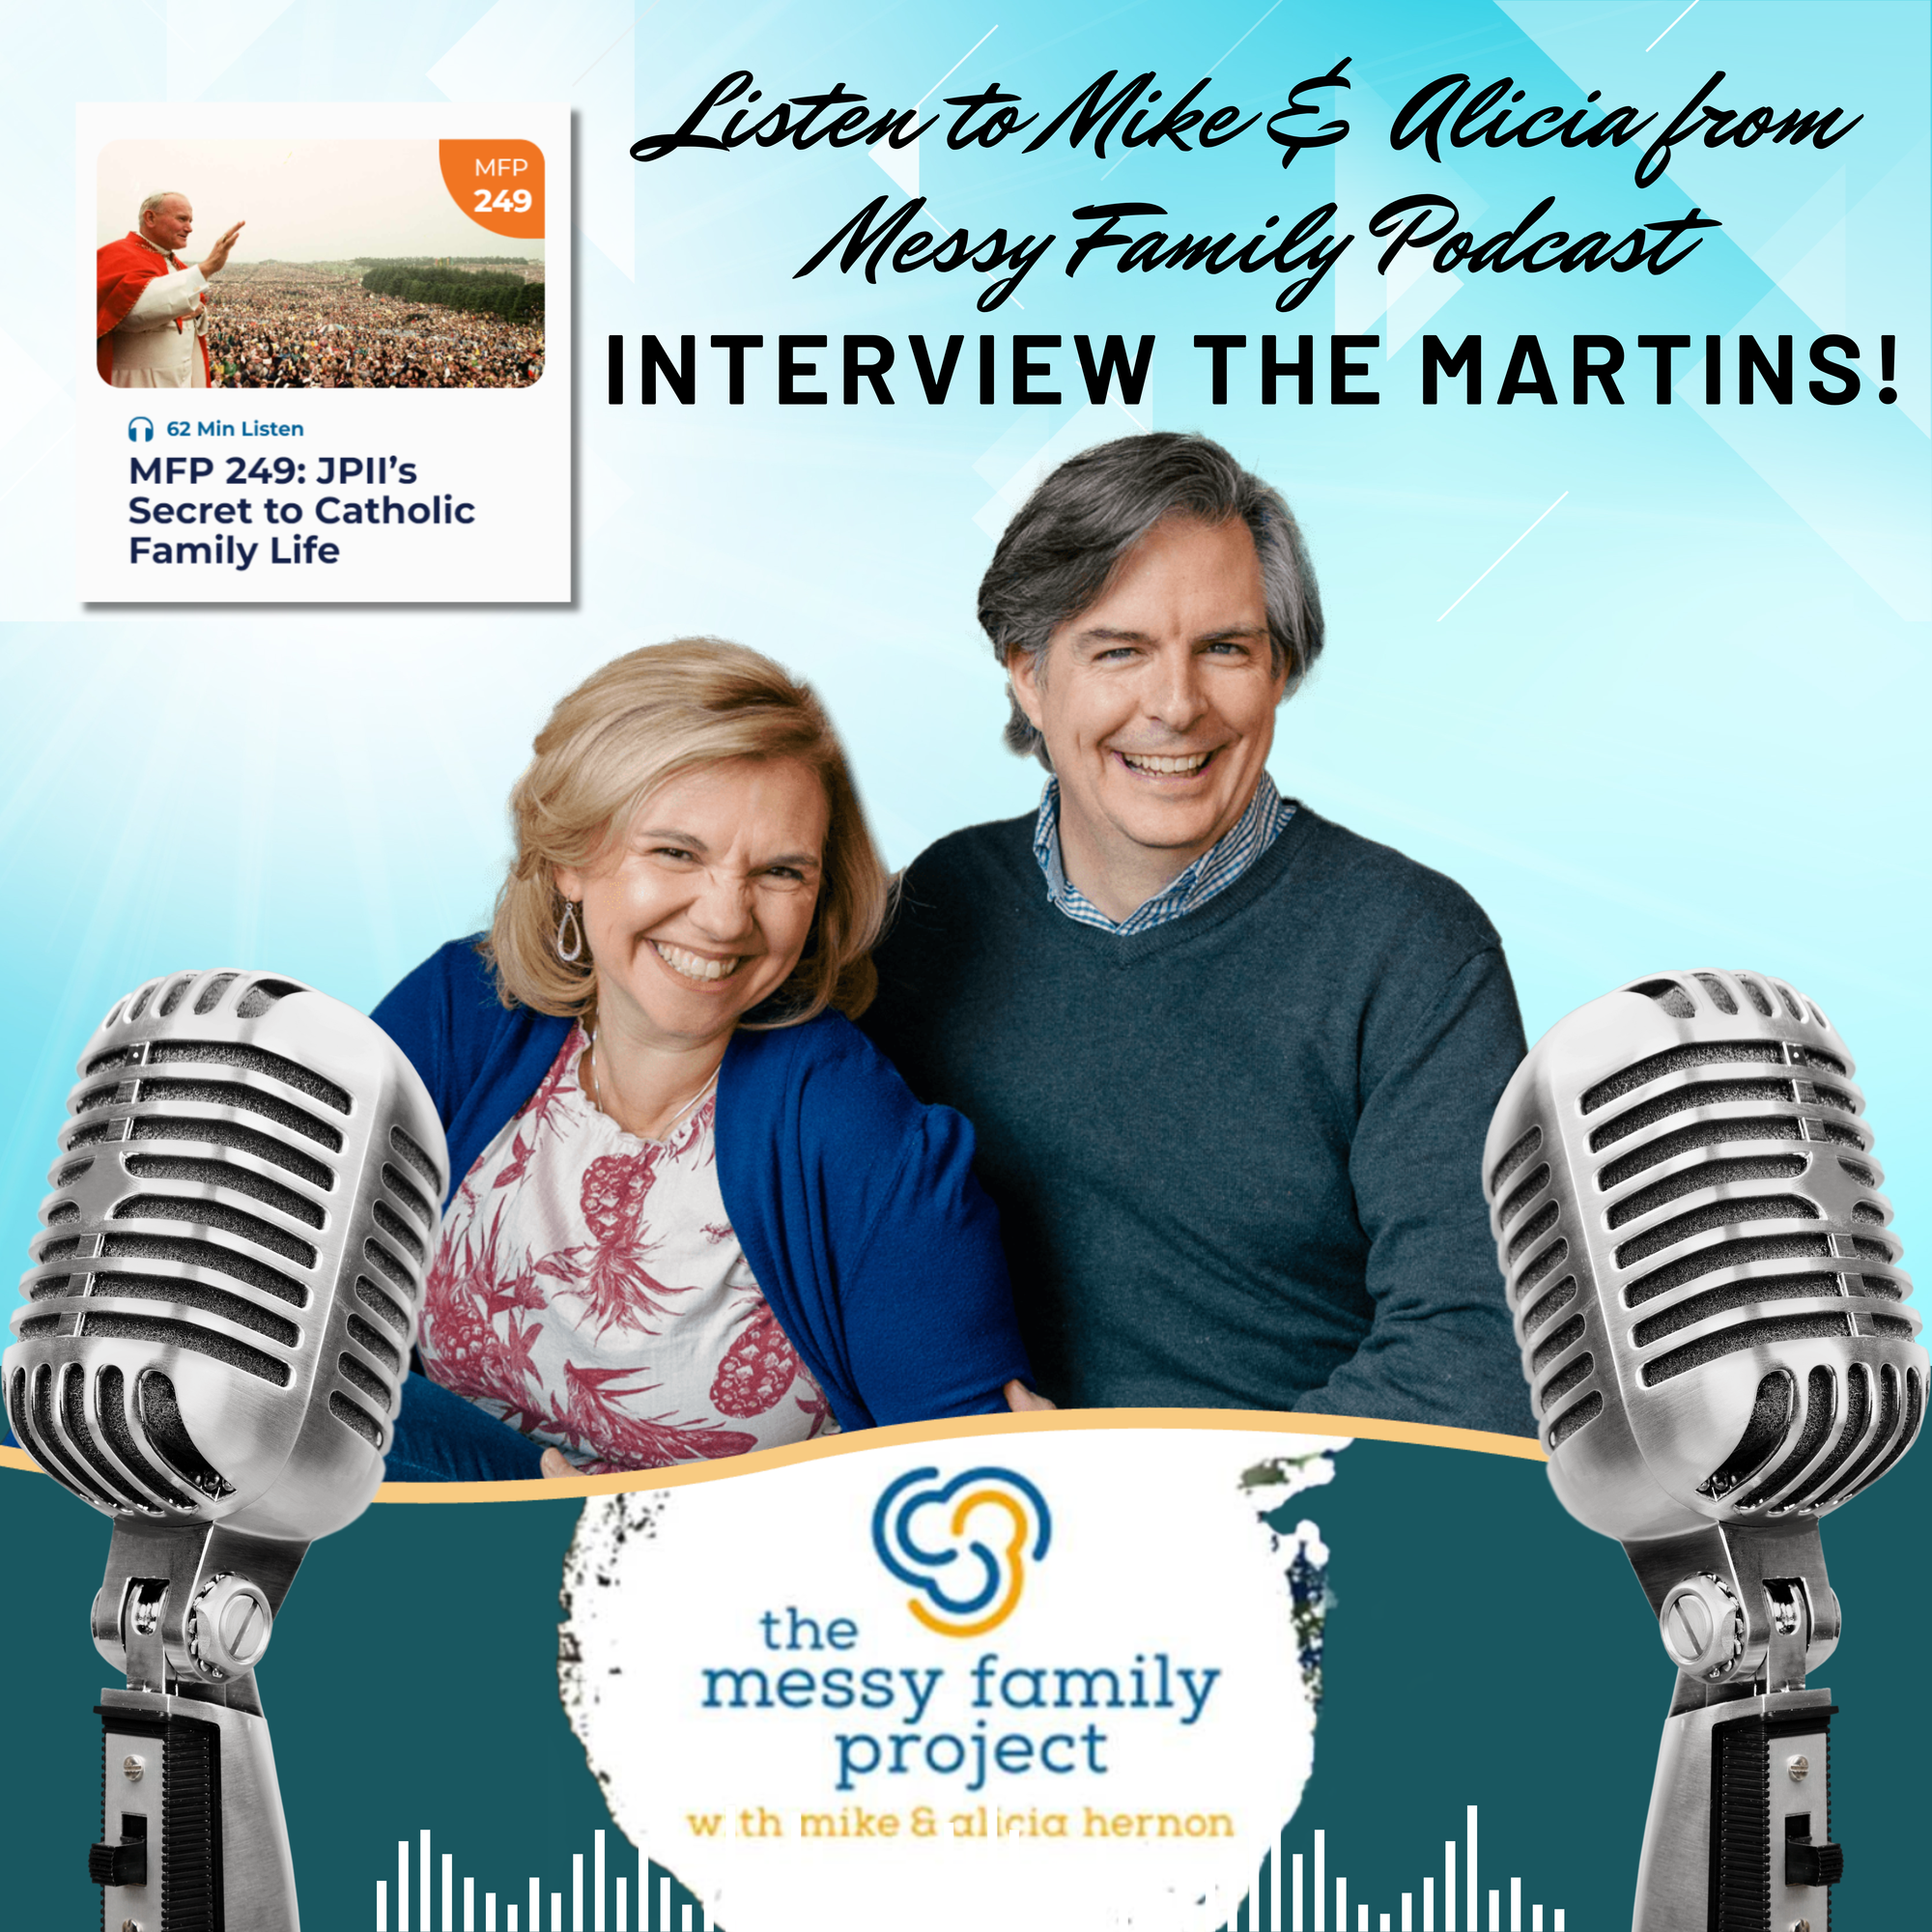 FANTASTIC INTERVIEW. Watch Now! Peter & Theresa Martin on the Messy Family Project Podcast!